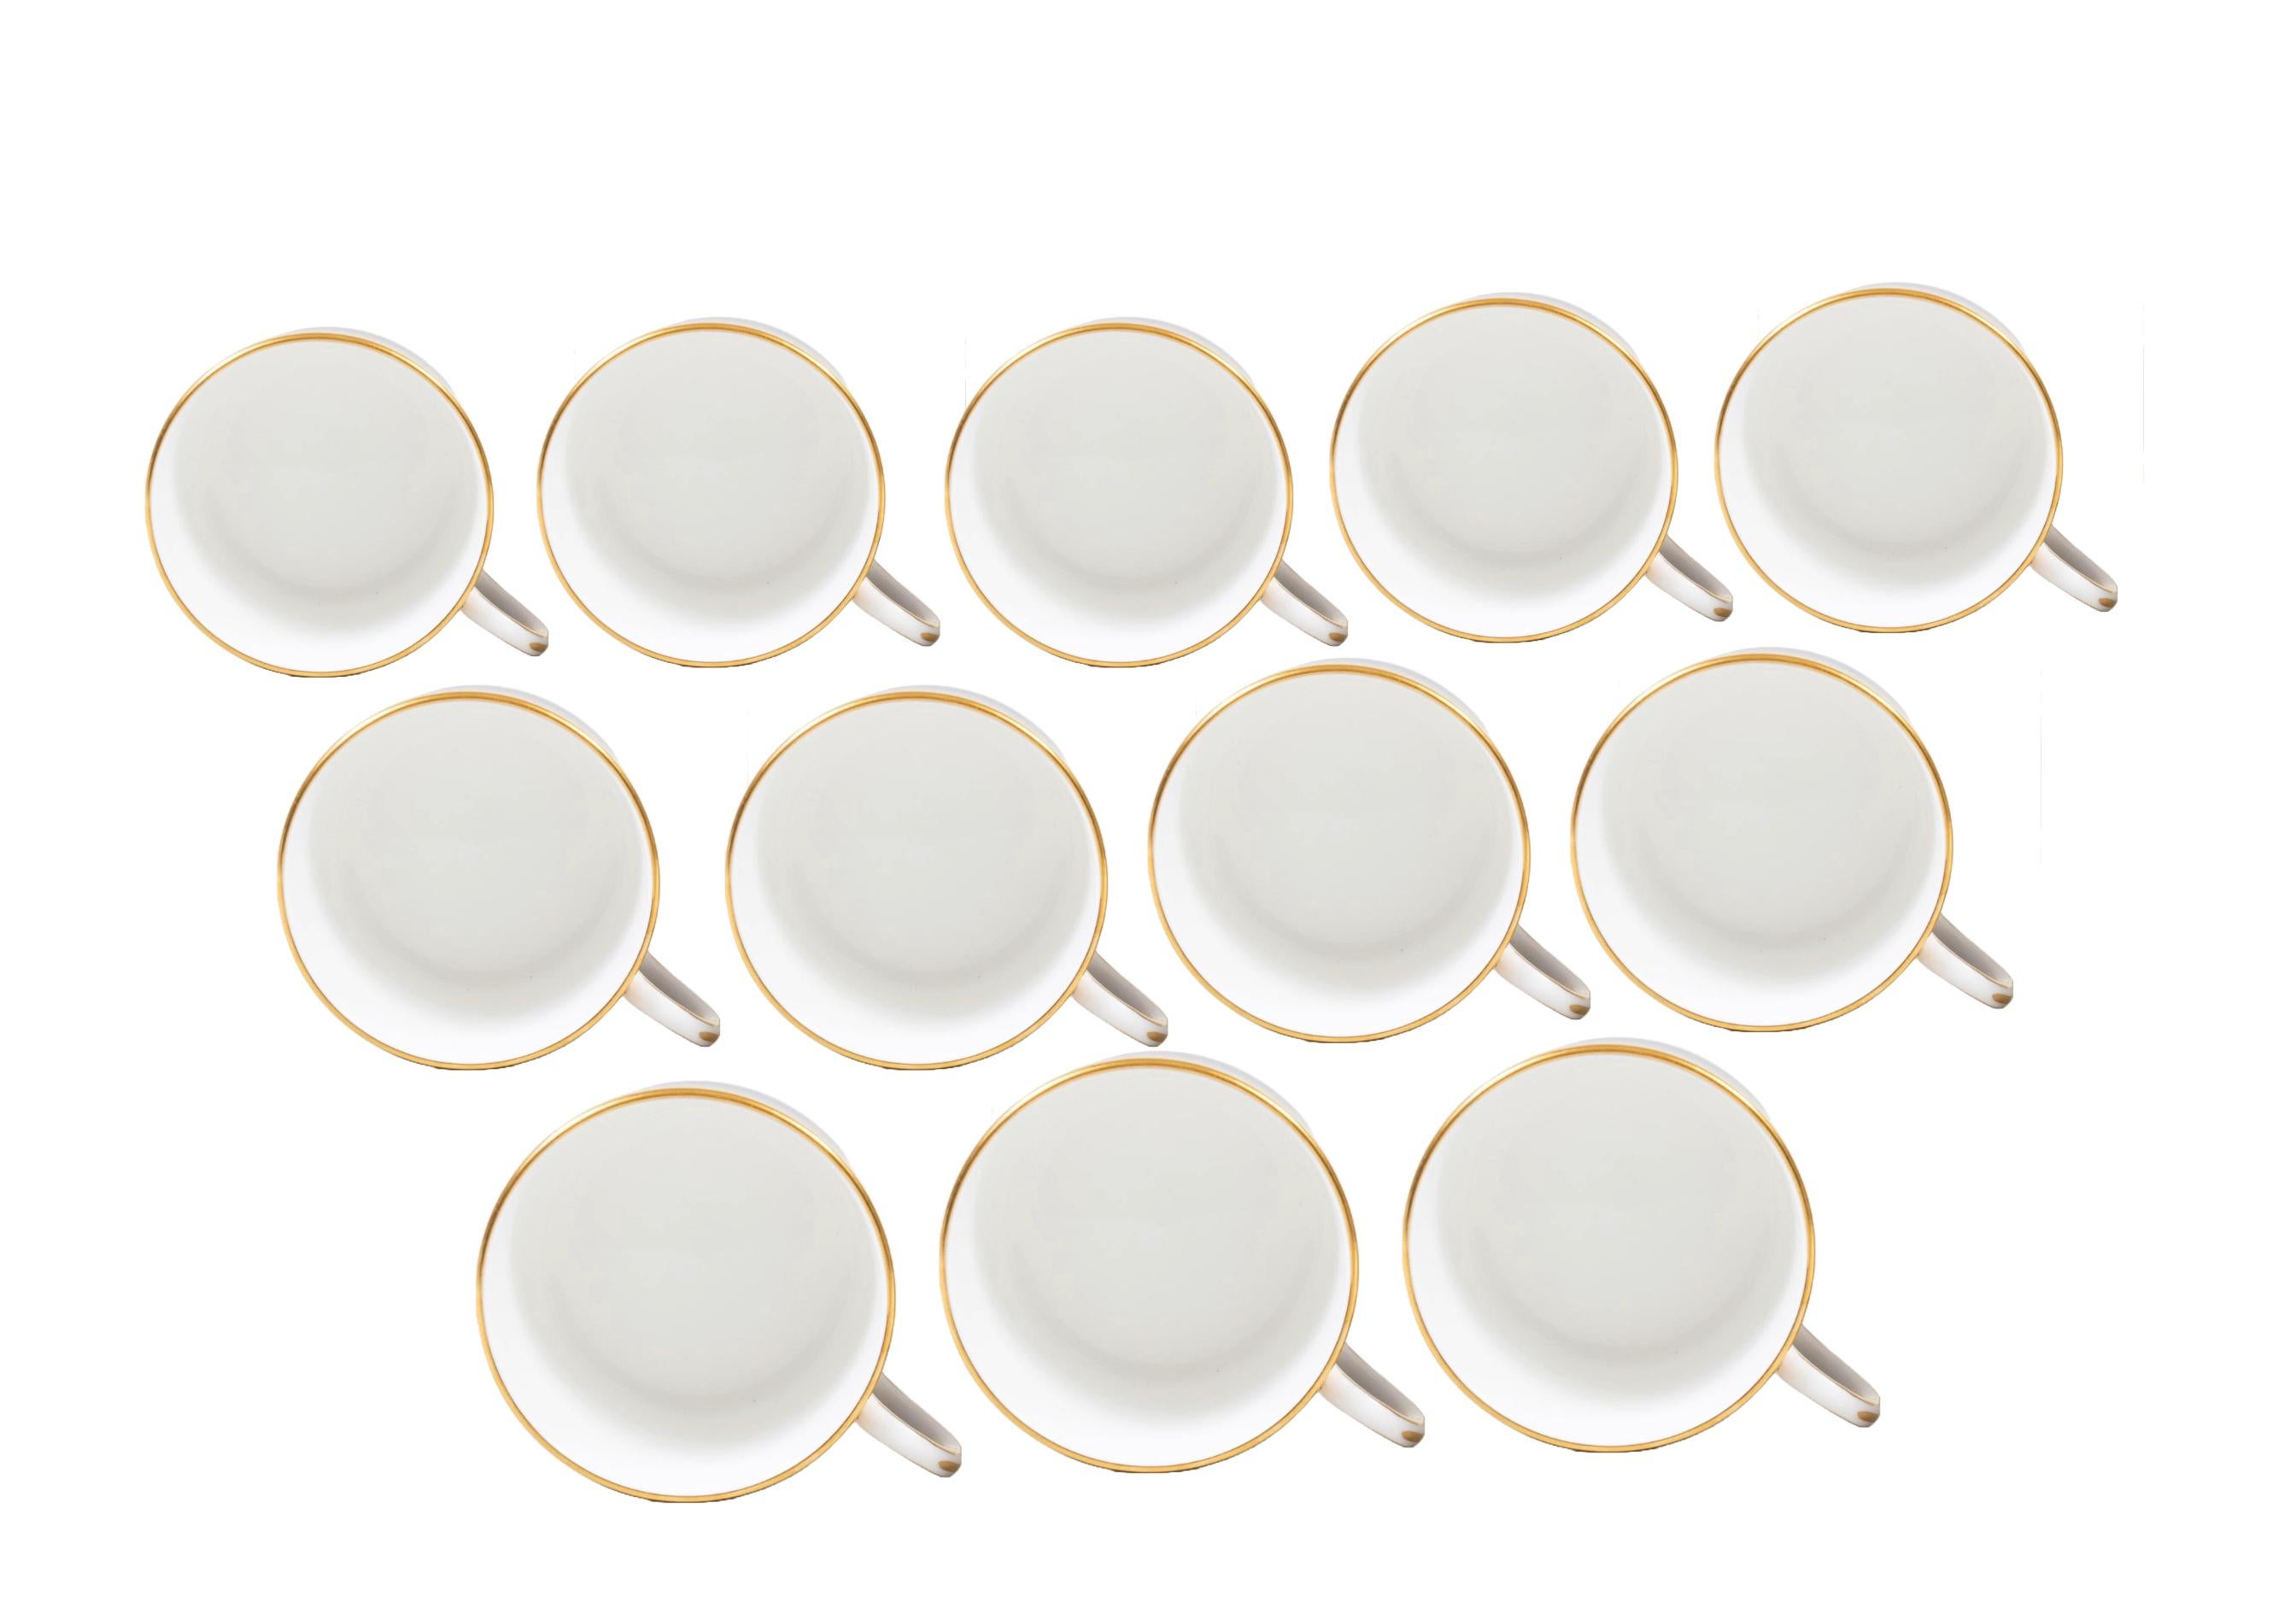 Complete English Porcelain Dinner Service For 12 People With Coffee/Tea Service For Sale 8